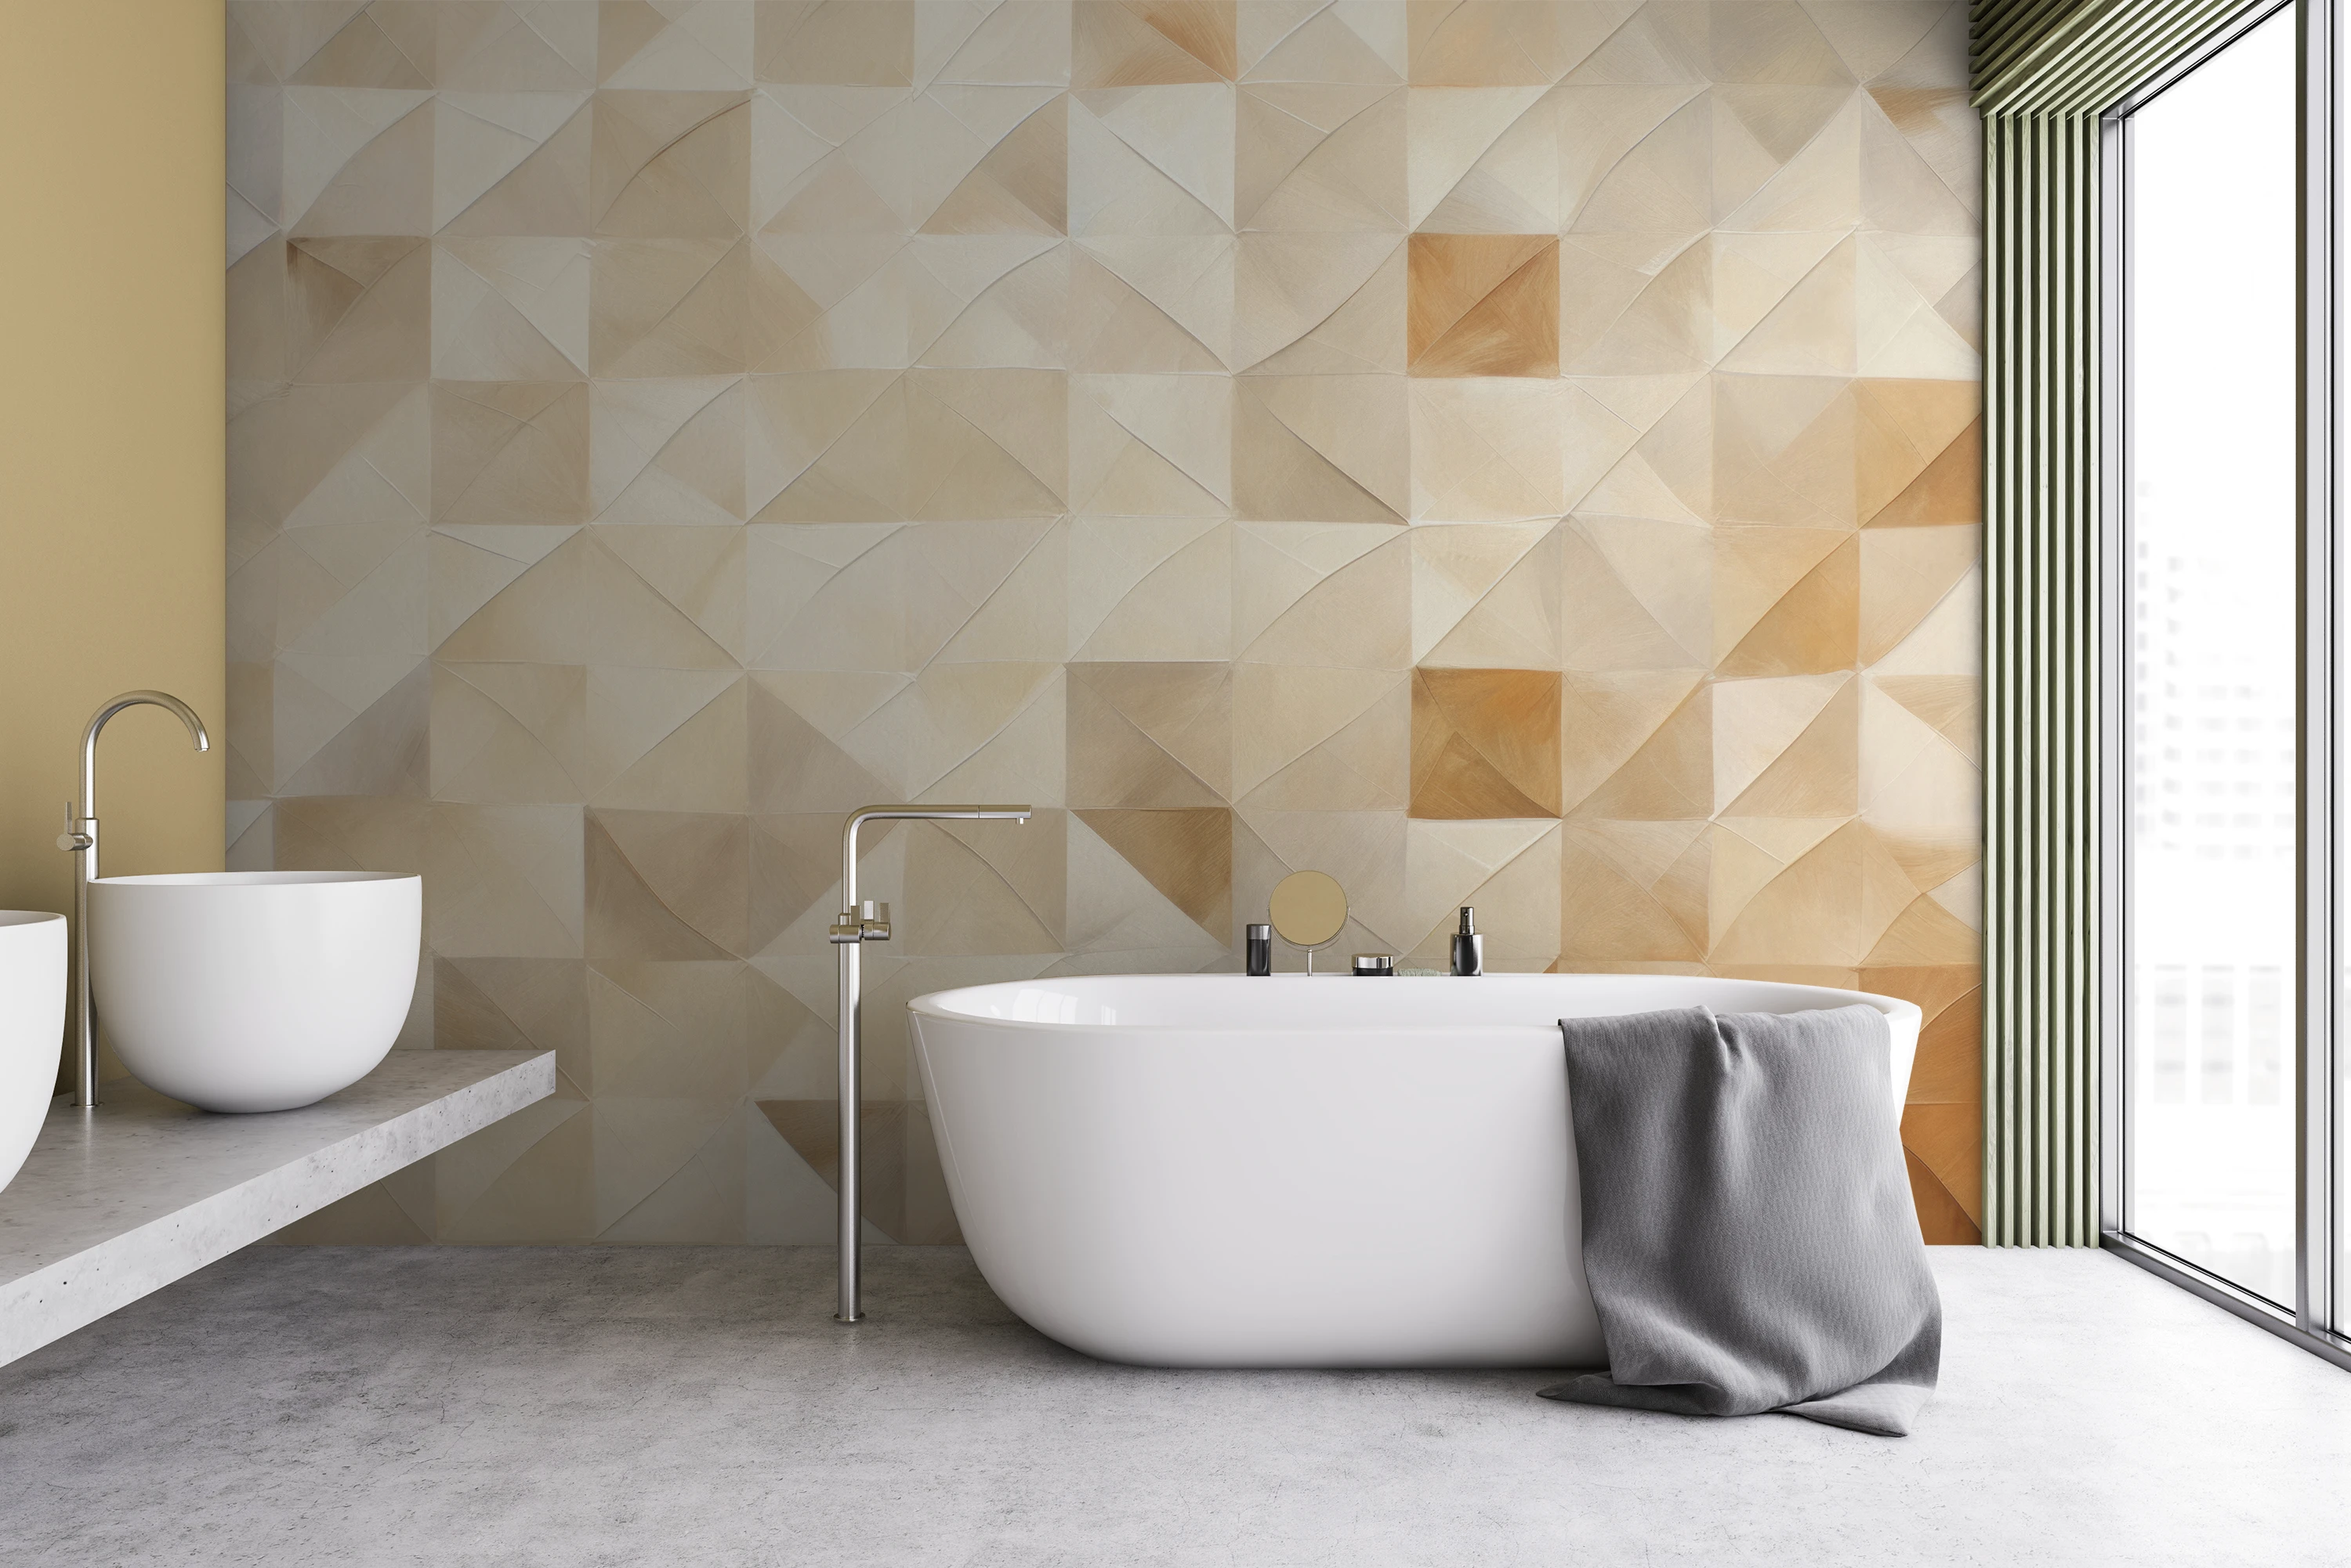 One of the Decomura photo wallpaper patterns from the "Mosaic Forms" collection